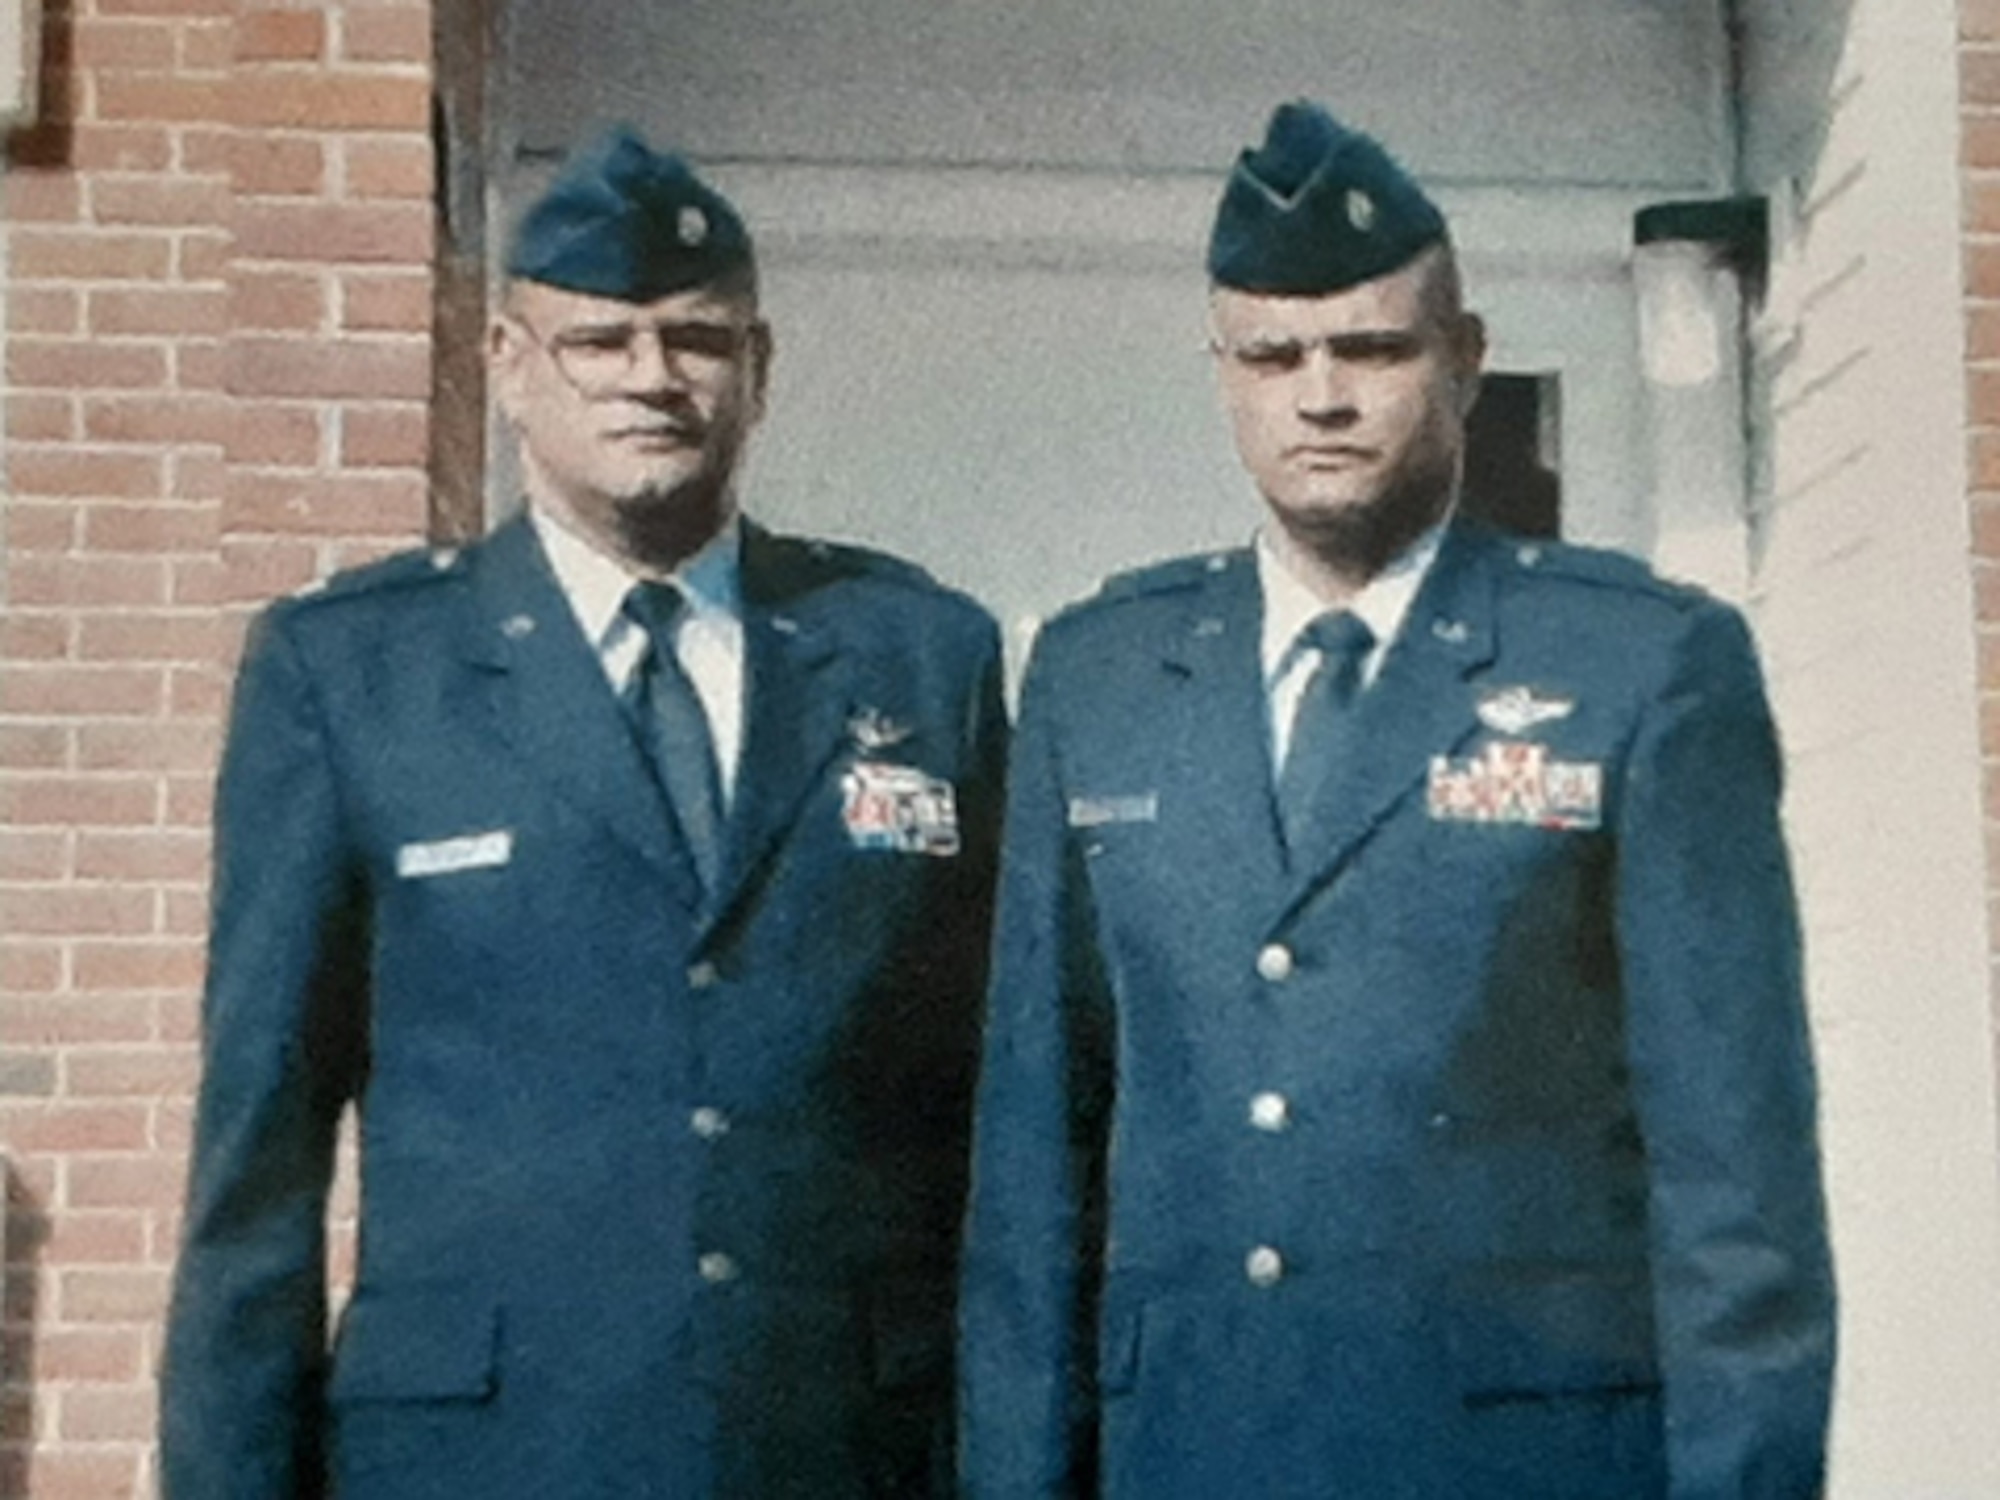 Kelvin Bowen, left, and Melvin Bowen, are identical twins who both served 23 years in the United States Air Force upon separation in August 2007. The brothers spent more than half of their Air Force career stationed at the same base. (Courtesy photo by Kelvin Bowen)